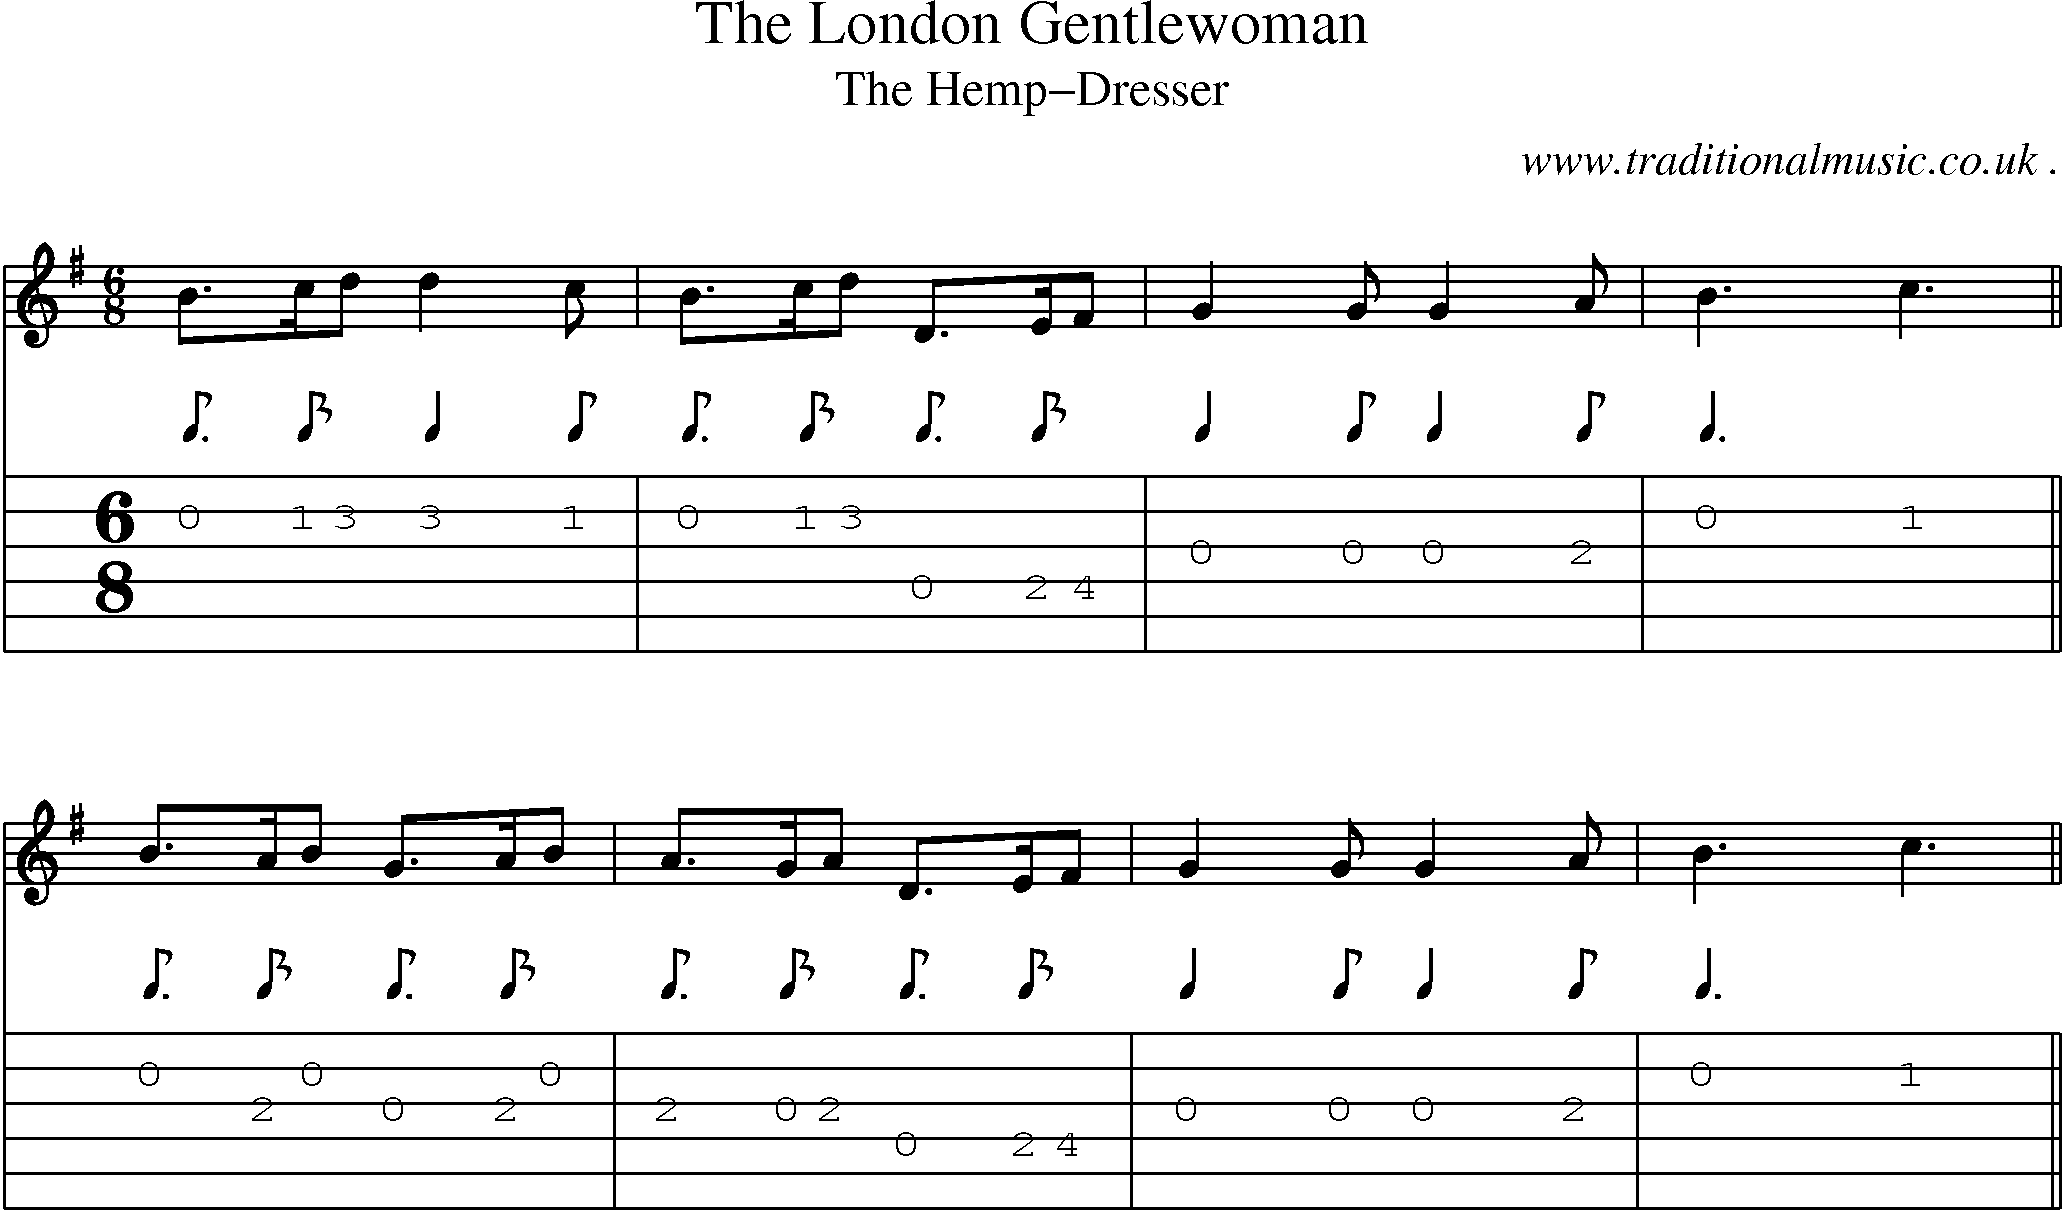 Sheet-Music and Guitar Tabs for The London Gentlewoman